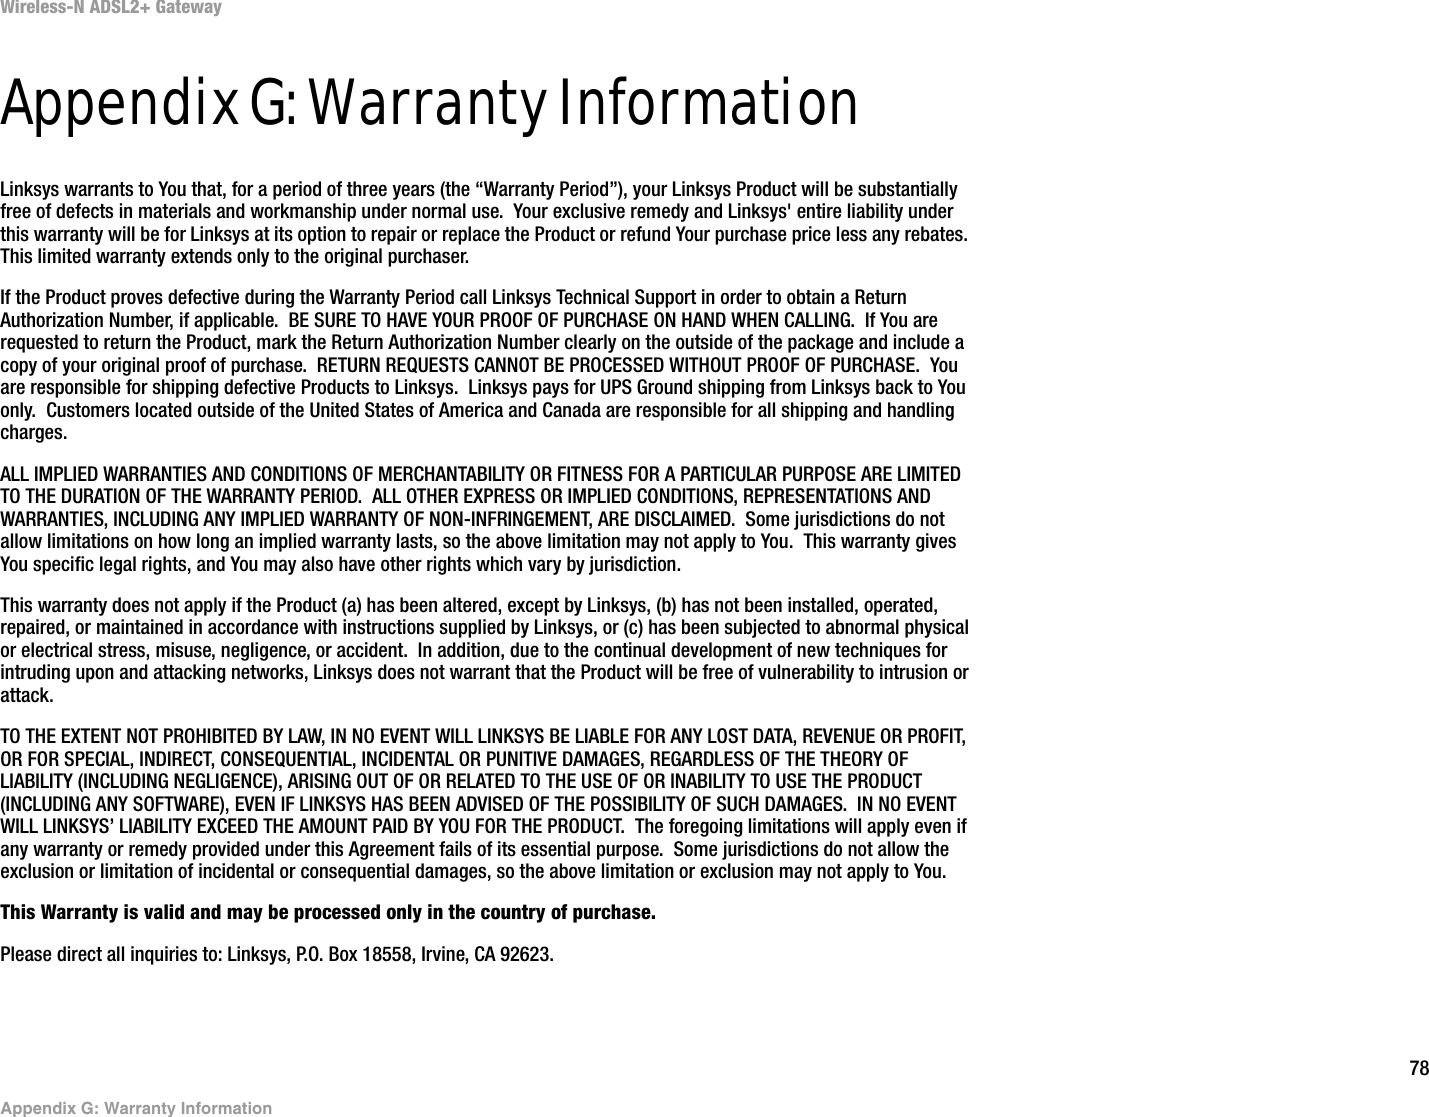 78Appendix G: Warranty InformationWireless-N ADSL2+ GatewayAppendix G: Warranty InformationLinksys warrants to You that, for a period of three years (the “Warranty Period”), your Linksys Product will be substantially free of defects in materials and workmanship under normal use.  Your exclusive remedy and Linksys&apos; entire liability under this warranty will be for Linksys at its option to repair or replace the Product or refund Your purchase price less any rebates.  This limited warranty extends only to the original purchaser.  If the Product proves defective during the Warranty Period call Linksys Technical Support in order to obtain a Return Authorization Number, if applicable.  BE SURE TO HAVE YOUR PROOF OF PURCHASE ON HAND WHEN CALLING.  If You are requested to return the Product, mark the Return Authorization Number clearly on the outside of the package and include a copy of your original proof of purchase.  RETURN REQUESTS CANNOT BE PROCESSED WITHOUT PROOF OF PURCHASE.  You are responsible for shipping defective Products to Linksys.  Linksys pays for UPS Ground shipping from Linksys back to You only.  Customers located outside of the United States of America and Canada are responsible for all shipping and handling charges. ALL IMPLIED WARRANTIES AND CONDITIONS OF MERCHANTABILITY OR FITNESS FOR A PARTICULAR PURPOSE ARE LIMITED TO THE DURATION OF THE WARRANTY PERIOD.  ALL OTHER EXPRESS OR IMPLIED CONDITIONS, REPRESENTATIONS AND WARRANTIES, INCLUDING ANY IMPLIED WARRANTY OF NON-INFRINGEMENT, ARE DISCLAIMED.  Some jurisdictions do not allow limitations on how long an implied warranty lasts, so the above limitation may not apply to You.  This warranty gives You specific legal rights, and You may also have other rights which vary by jurisdiction.This warranty does not apply if the Product (a) has been altered, except by Linksys, (b) has not been installed, operated, repaired, or maintained in accordance with instructions supplied by Linksys, or (c) has been subjected to abnormal physical or electrical stress, misuse, negligence, or accident.  In addition, due to the continual development of new techniques for intruding upon and attacking networks, Linksys does not warrant that the Product will be free of vulnerability to intrusion or attack.TO THE EXTENT NOT PROHIBITED BY LAW, IN NO EVENT WILL LINKSYS BE LIABLE FOR ANY LOST DATA, REVENUE OR PROFIT, OR FOR SPECIAL, INDIRECT, CONSEQUENTIAL, INCIDENTAL OR PUNITIVE DAMAGES, REGARDLESS OF THE THEORY OF LIABILITY (INCLUDING NEGLIGENCE), ARISING OUT OF OR RELATED TO THE USE OF OR INABILITY TO USE THE PRODUCT (INCLUDING ANY SOFTWARE), EVEN IF LINKSYS HAS BEEN ADVISED OF THE POSSIBILITY OF SUCH DAMAGES.  IN NO EVENT WILL LINKSYS’ LIABILITY EXCEED THE AMOUNT PAID BY YOU FOR THE PRODUCT.  The foregoing limitations will apply even if any warranty or remedy provided under this Agreement fails of its essential purpose.  Some jurisdictions do not allow the exclusion or limitation of incidental or consequential damages, so the above limitation or exclusion may not apply to You.This Warranty is valid and may be processed only in the country of purchase.Please direct all inquiries to: Linksys, P.O. Box 18558, Irvine, CA 92623.